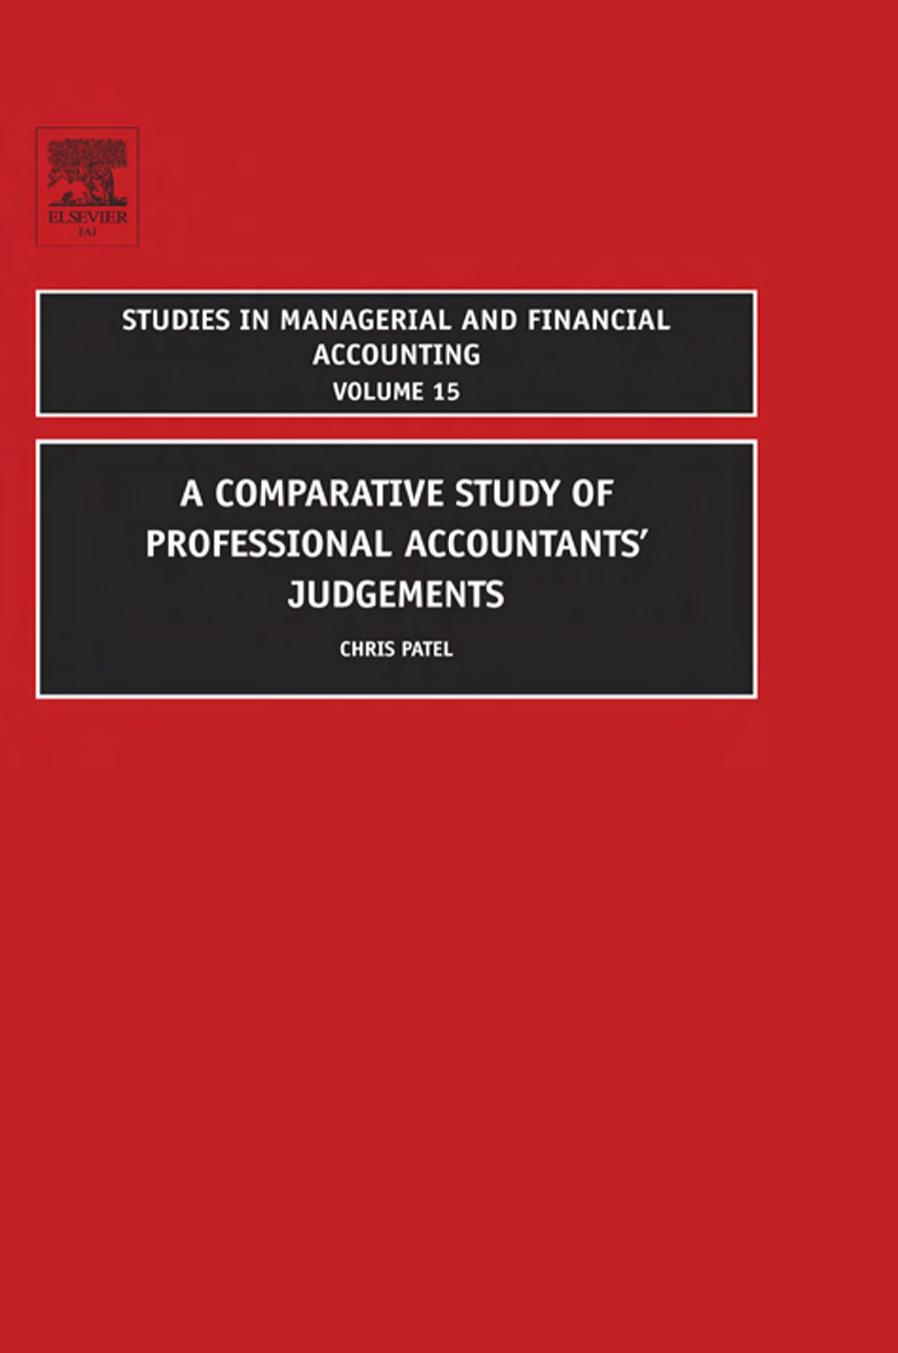 A Comparative Study of Professional Accountants Judgements, Volume 15 2006